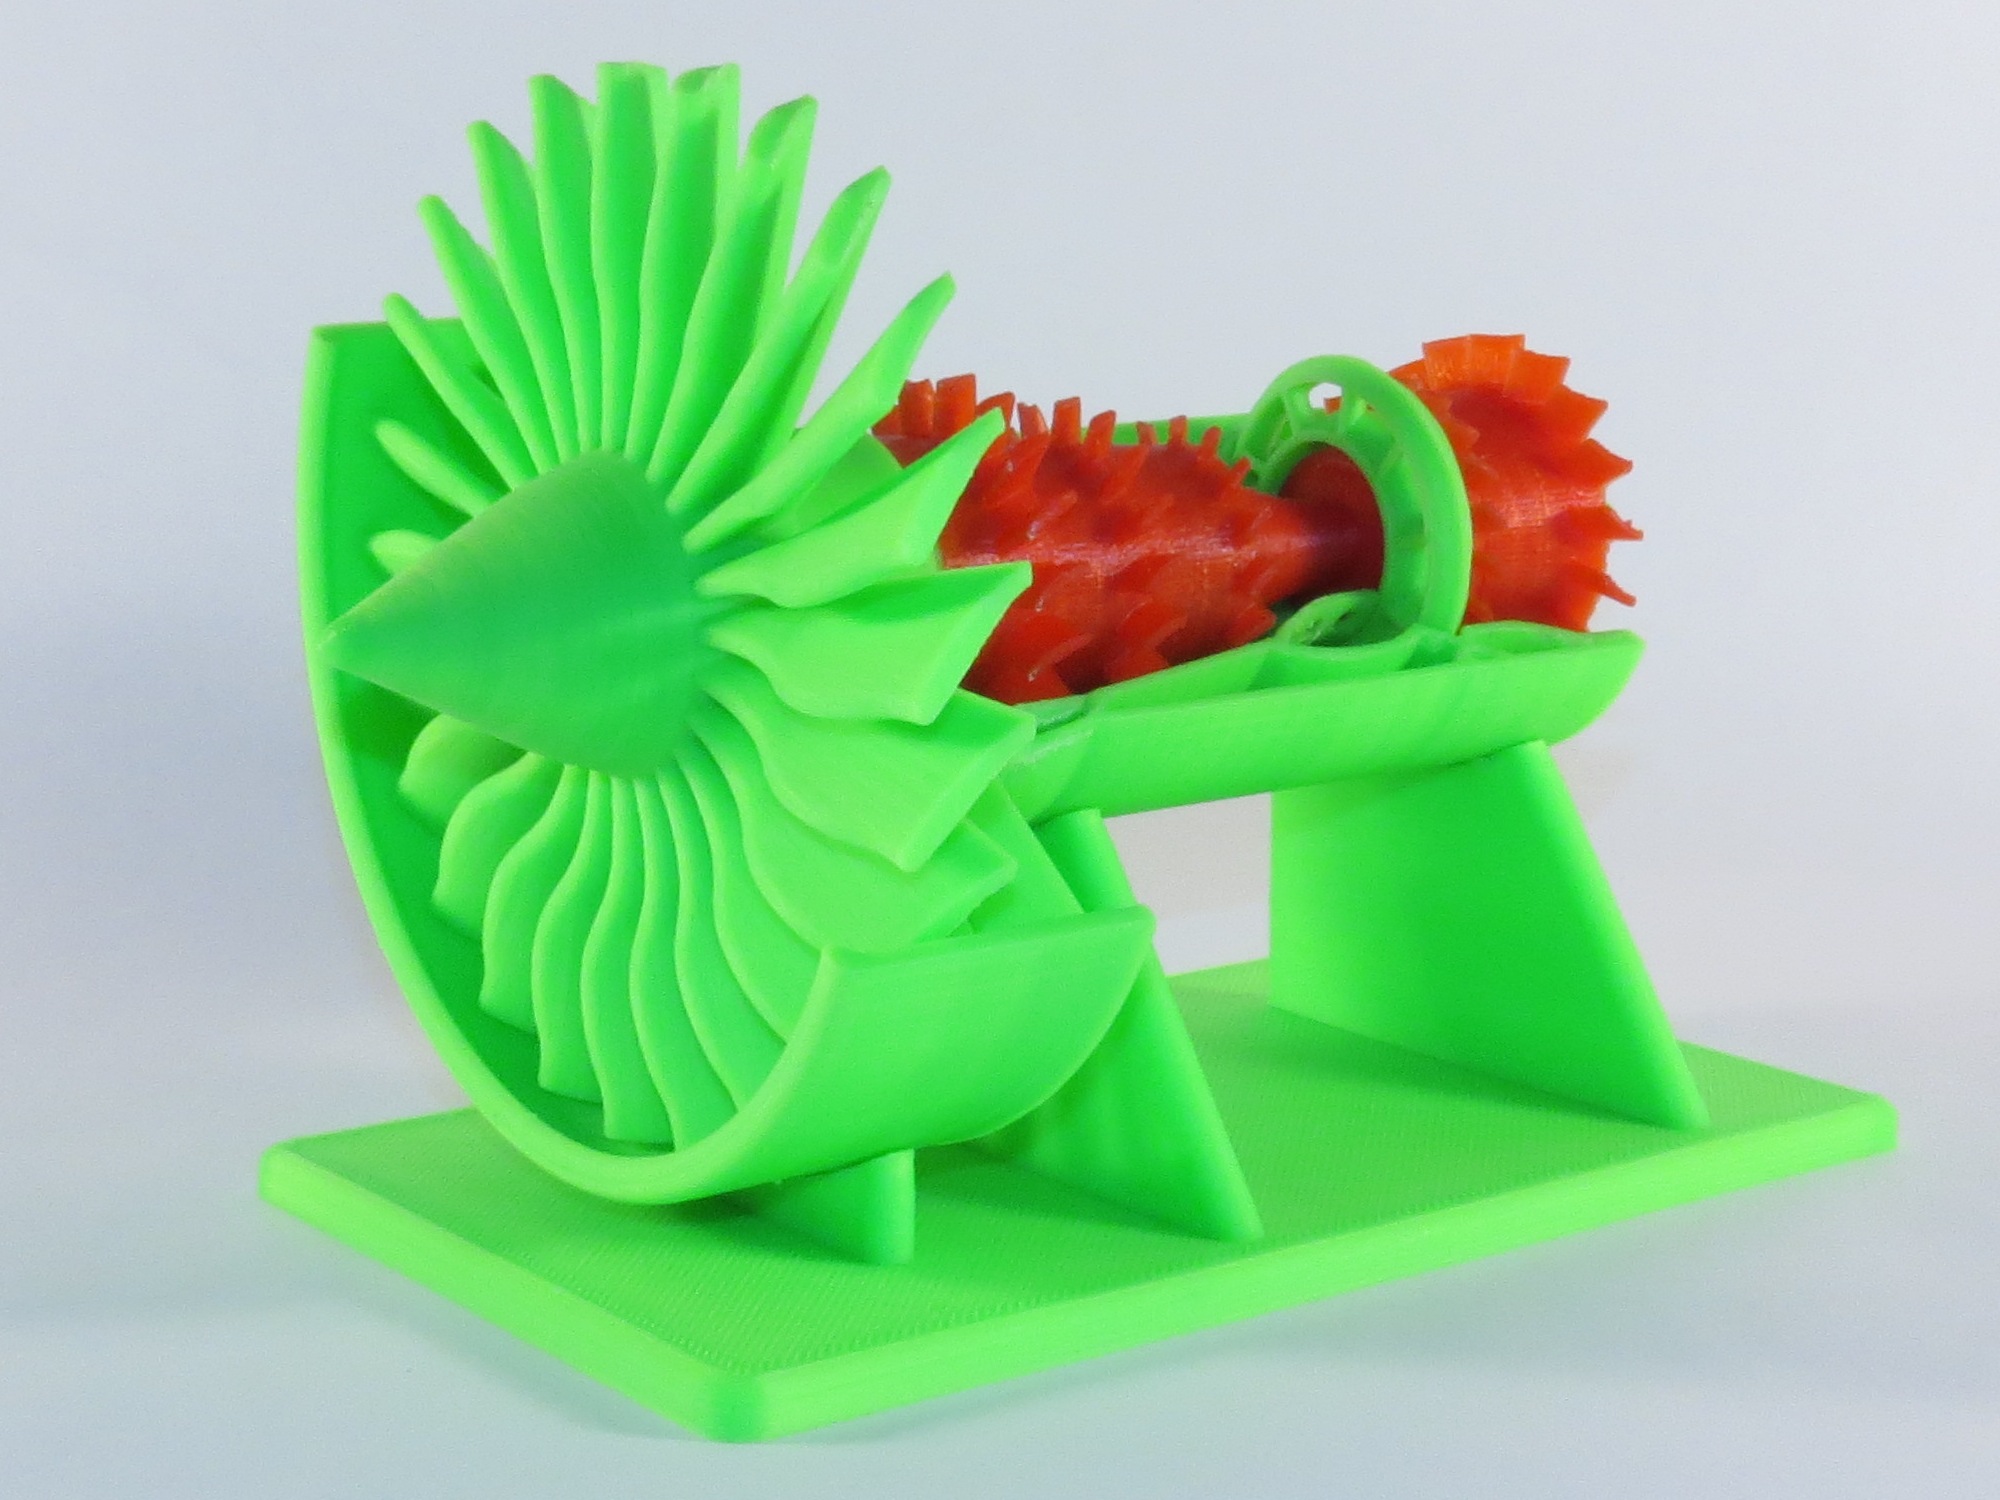 abs-3d-printed-jet-engine-model-3-with-3fxtrud-by-shapingbits.jpg